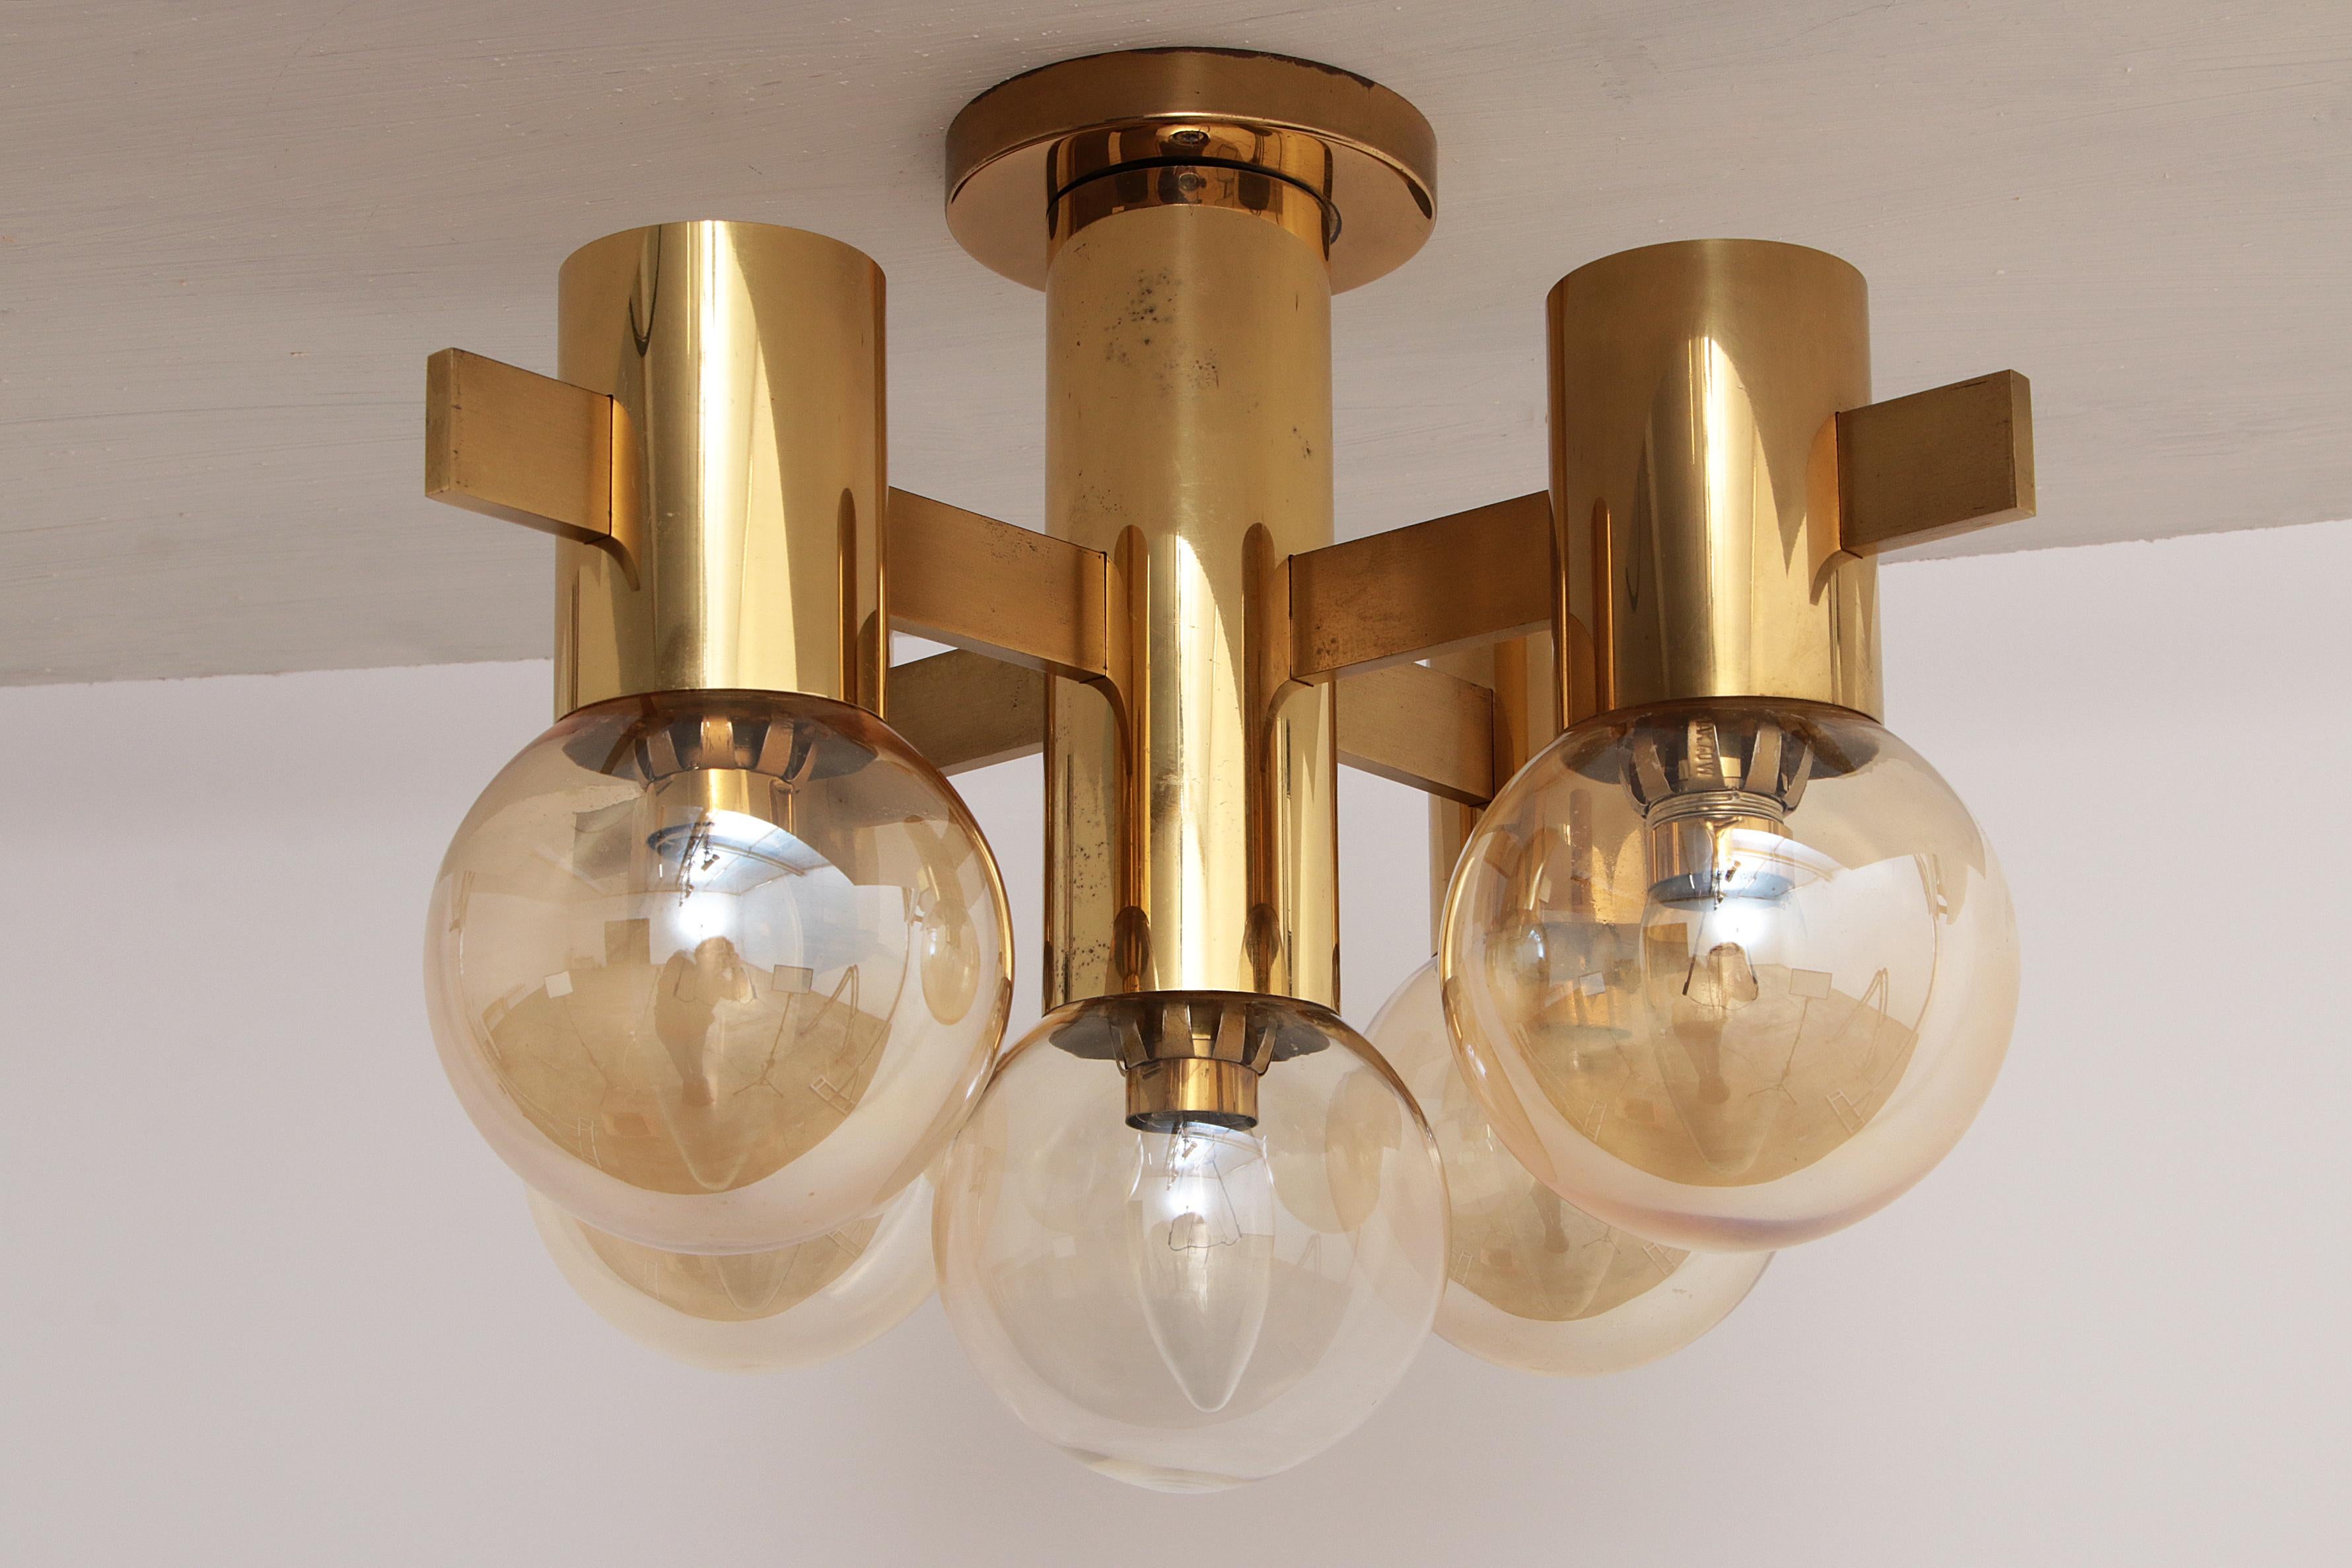 Hans-Agne Jakobsen brass chandelier with opal glass Sweden 1960

Discover the timeless elegance of the Hans-Agne Jakobssen chandelier, a masterpiece that transforms any room with its subtle shine and refined design. Crafted at AB Markaryd in Sweden,